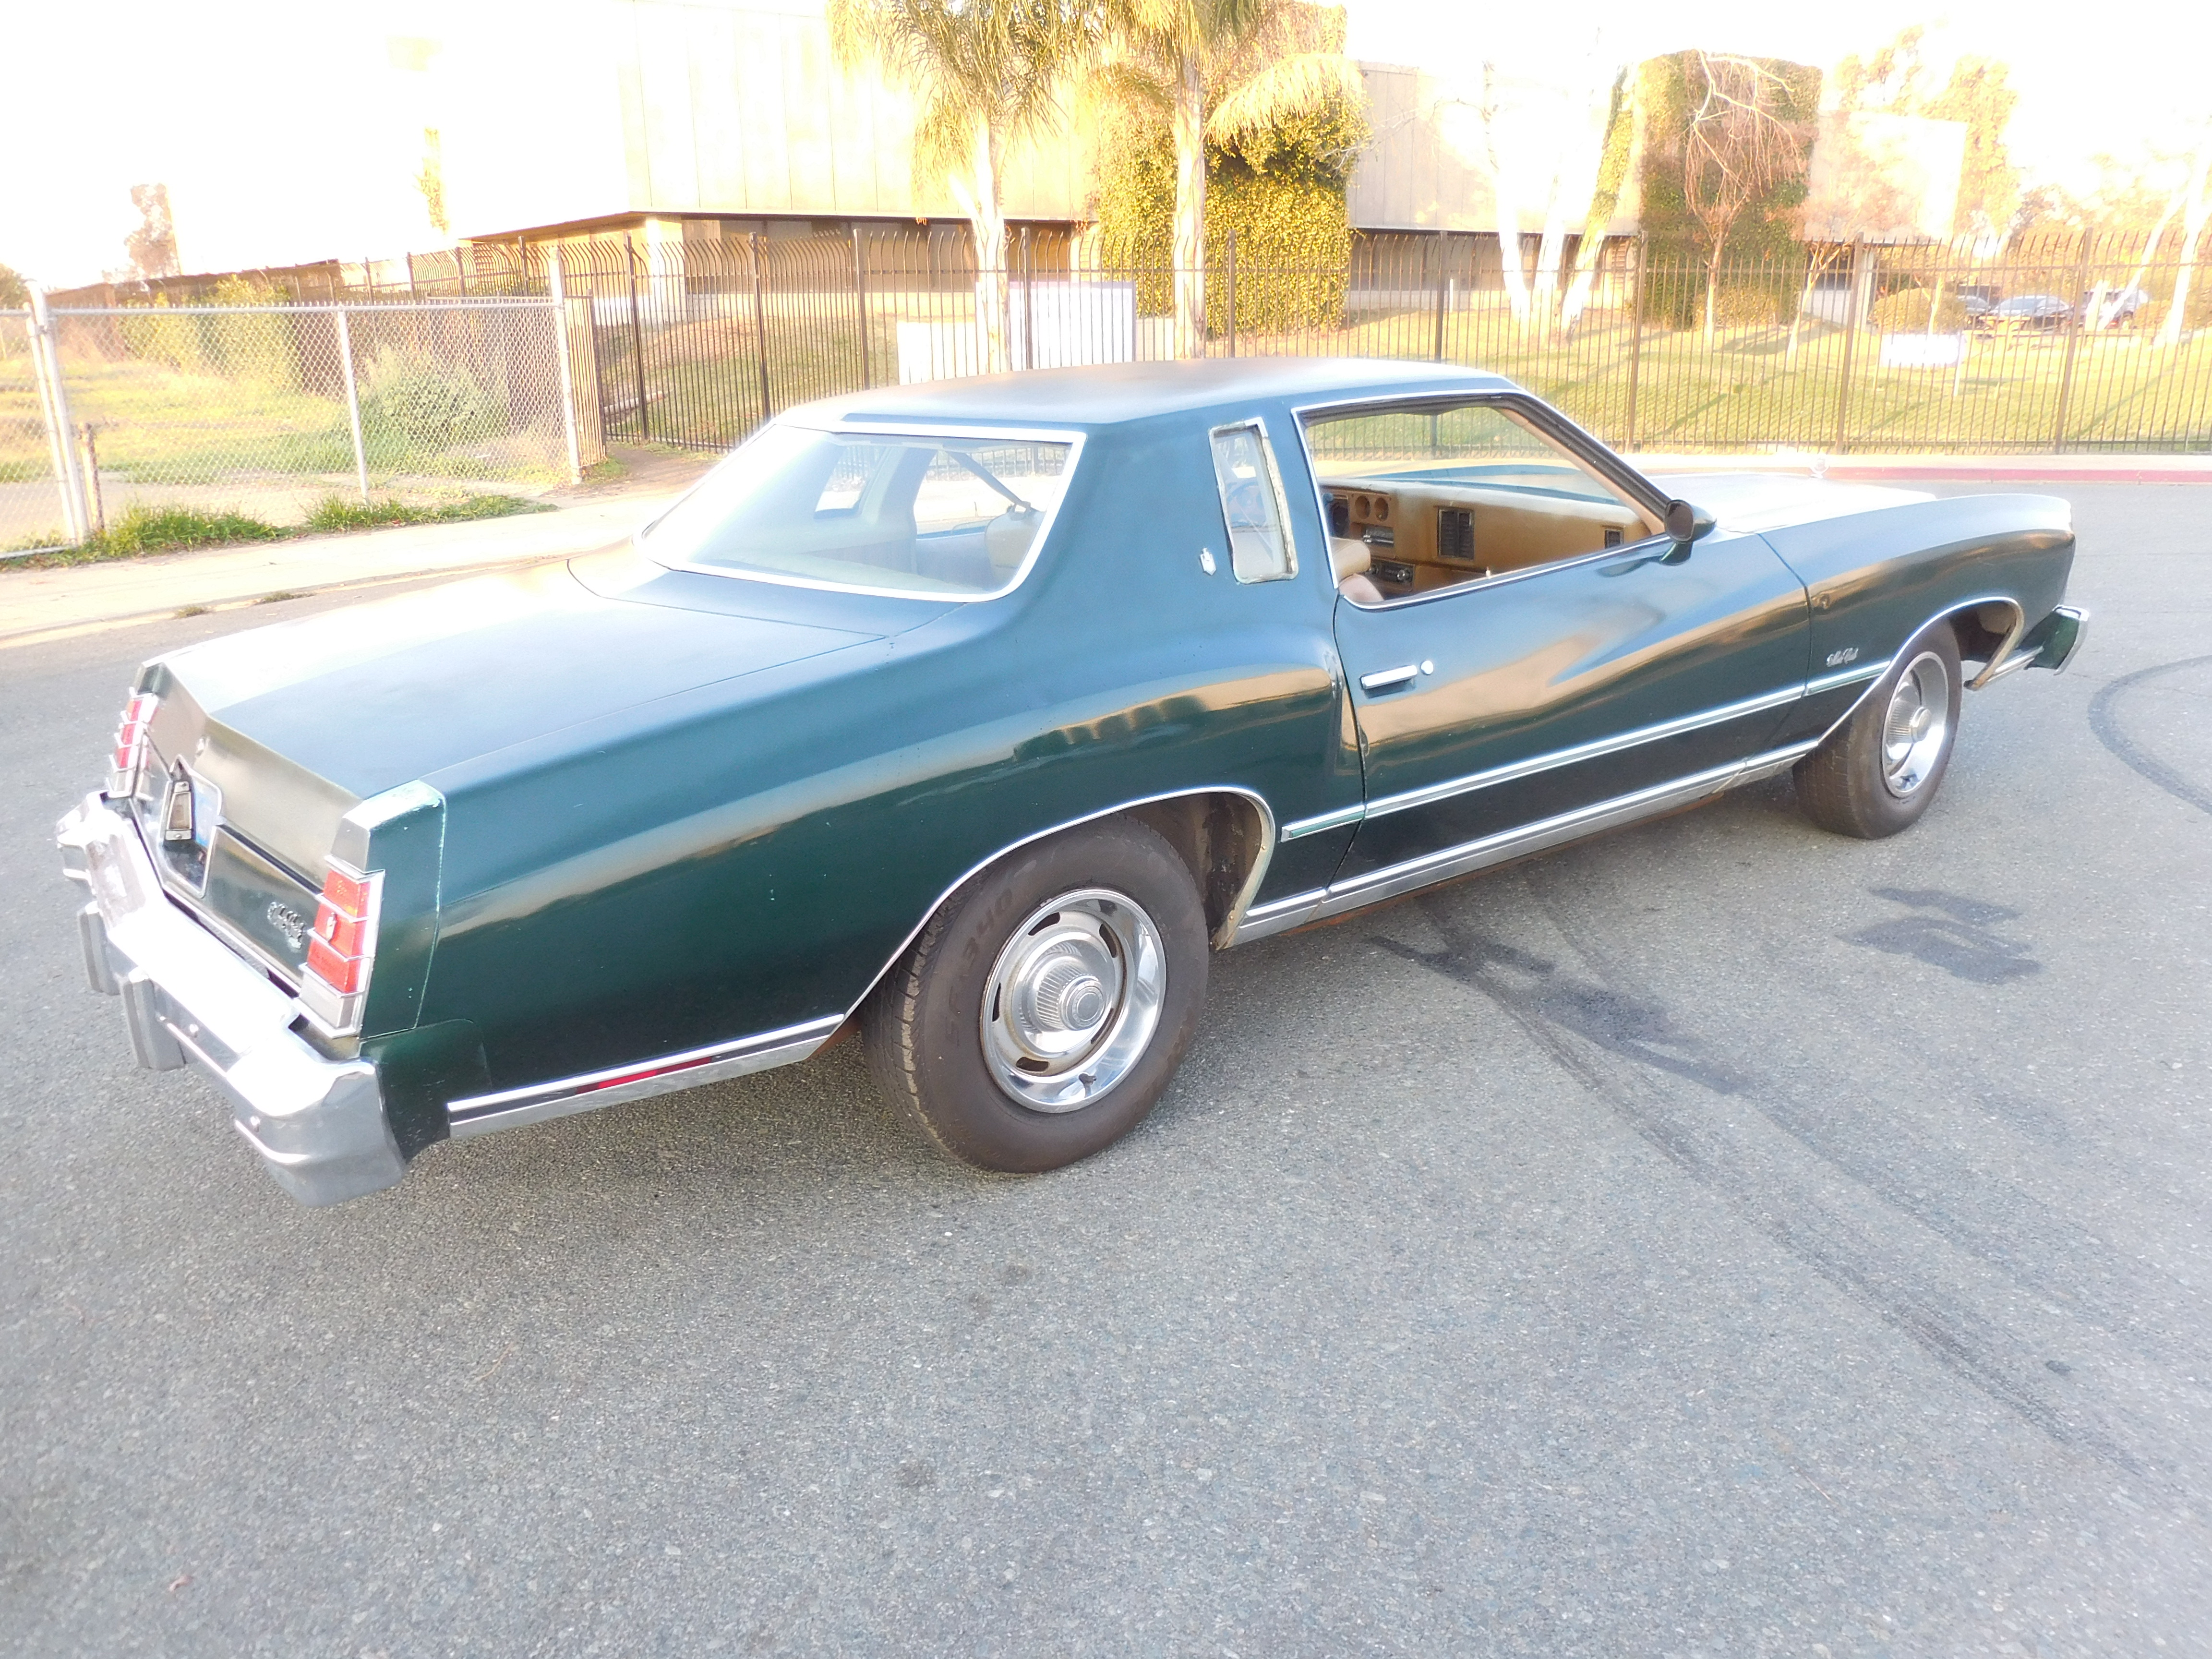 1977, Chevrolet, Monte, Carlo,cars for sale,car for,sale,cars,for,sale,car,